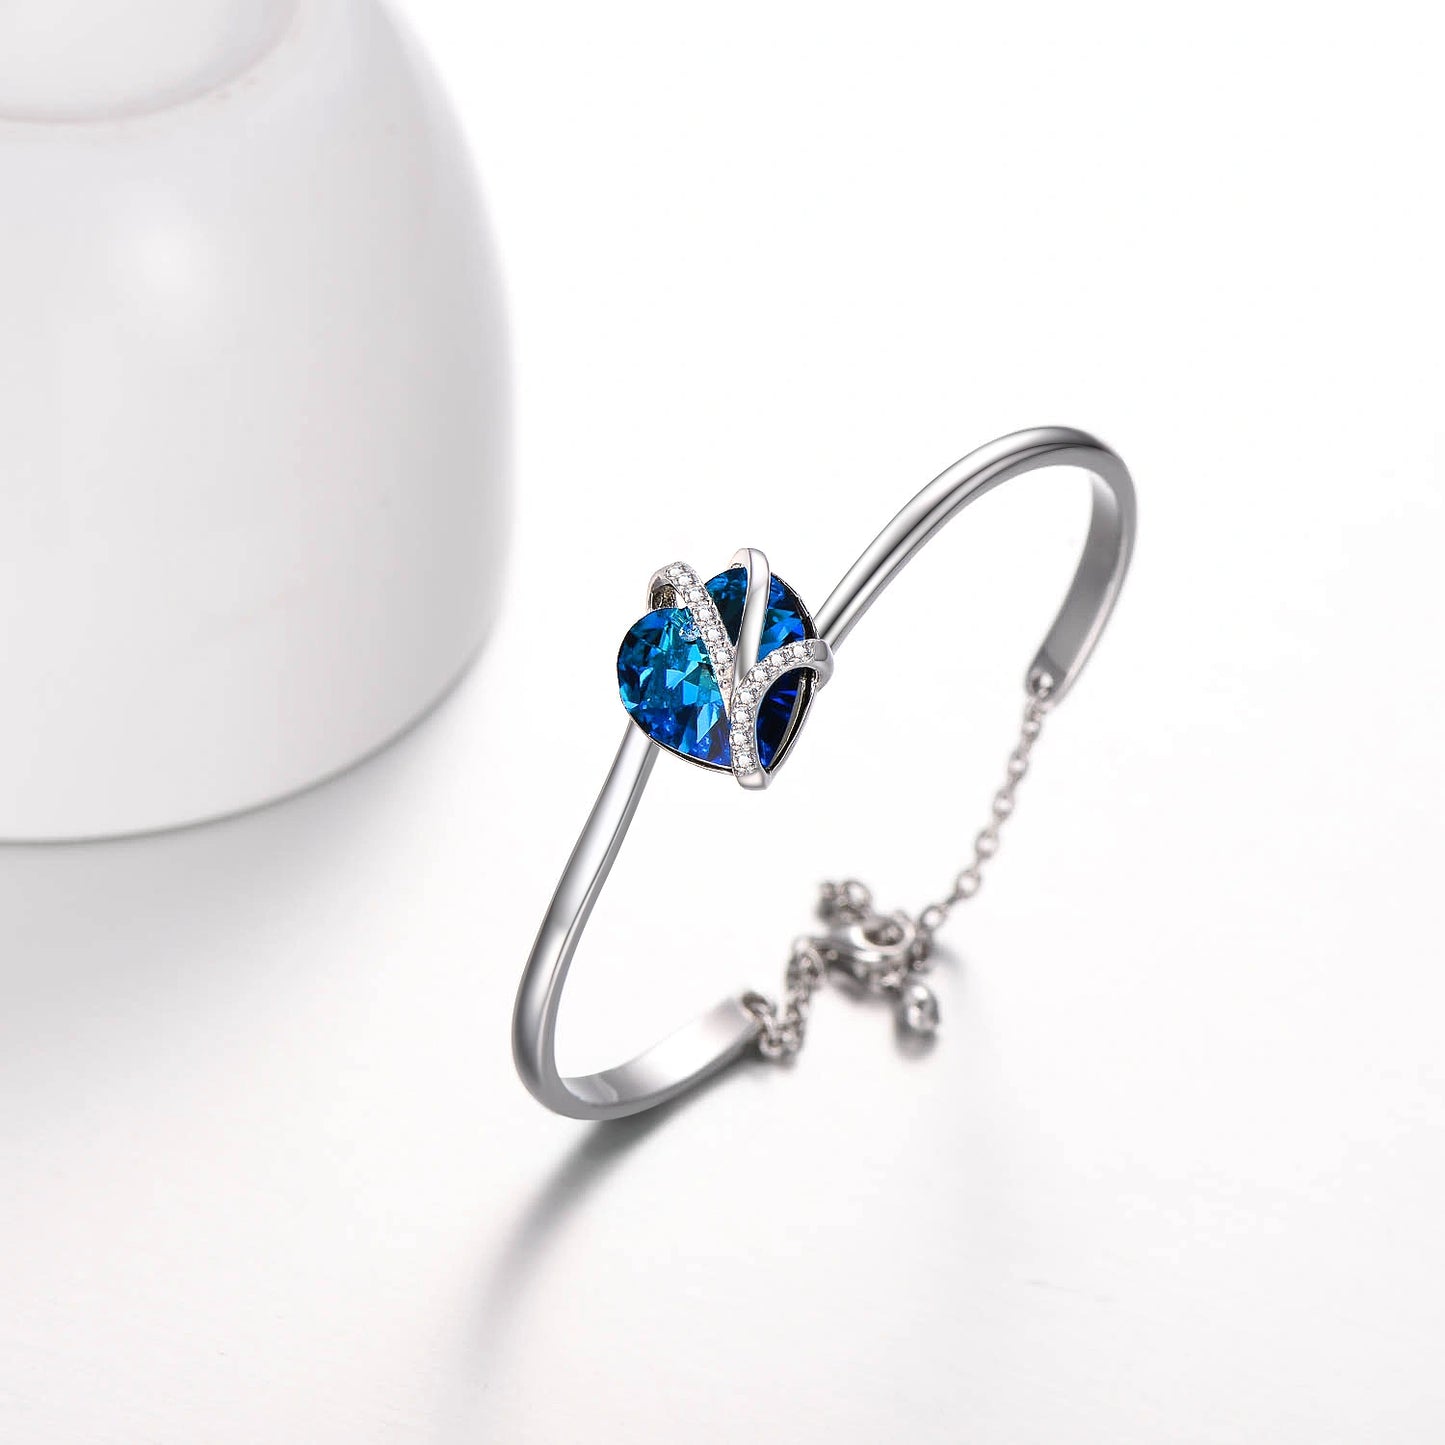 Heart Bangle with 925 sterling silver